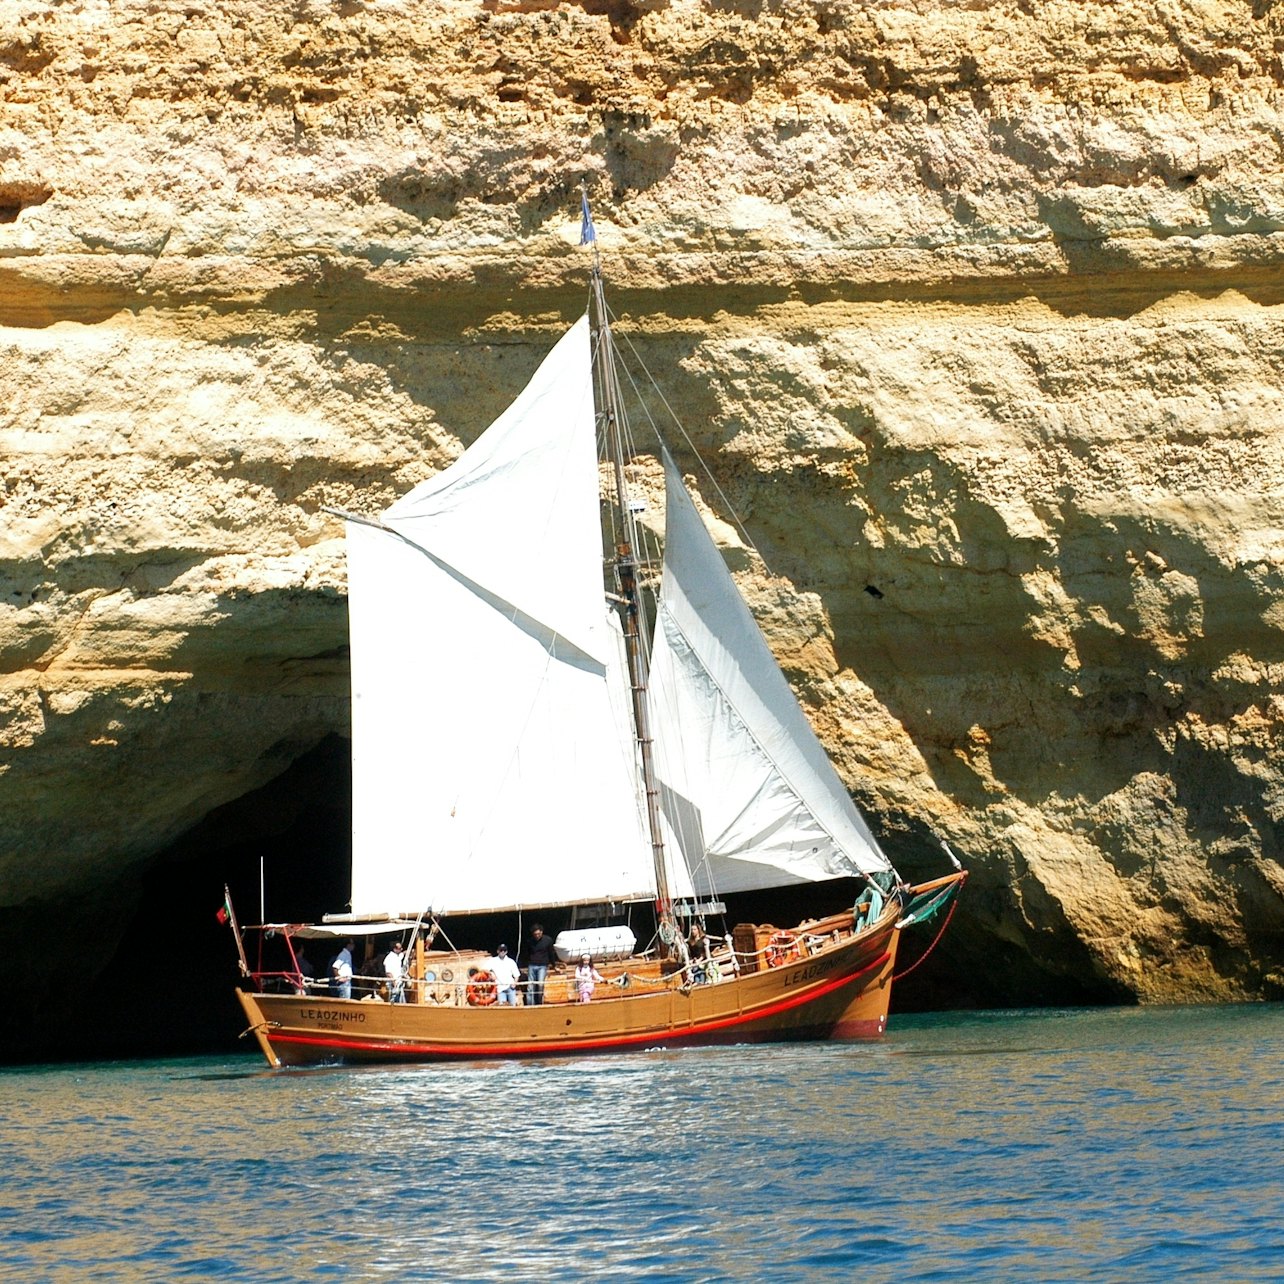 Captain Hook Cruise - Accommodations in Albufeira